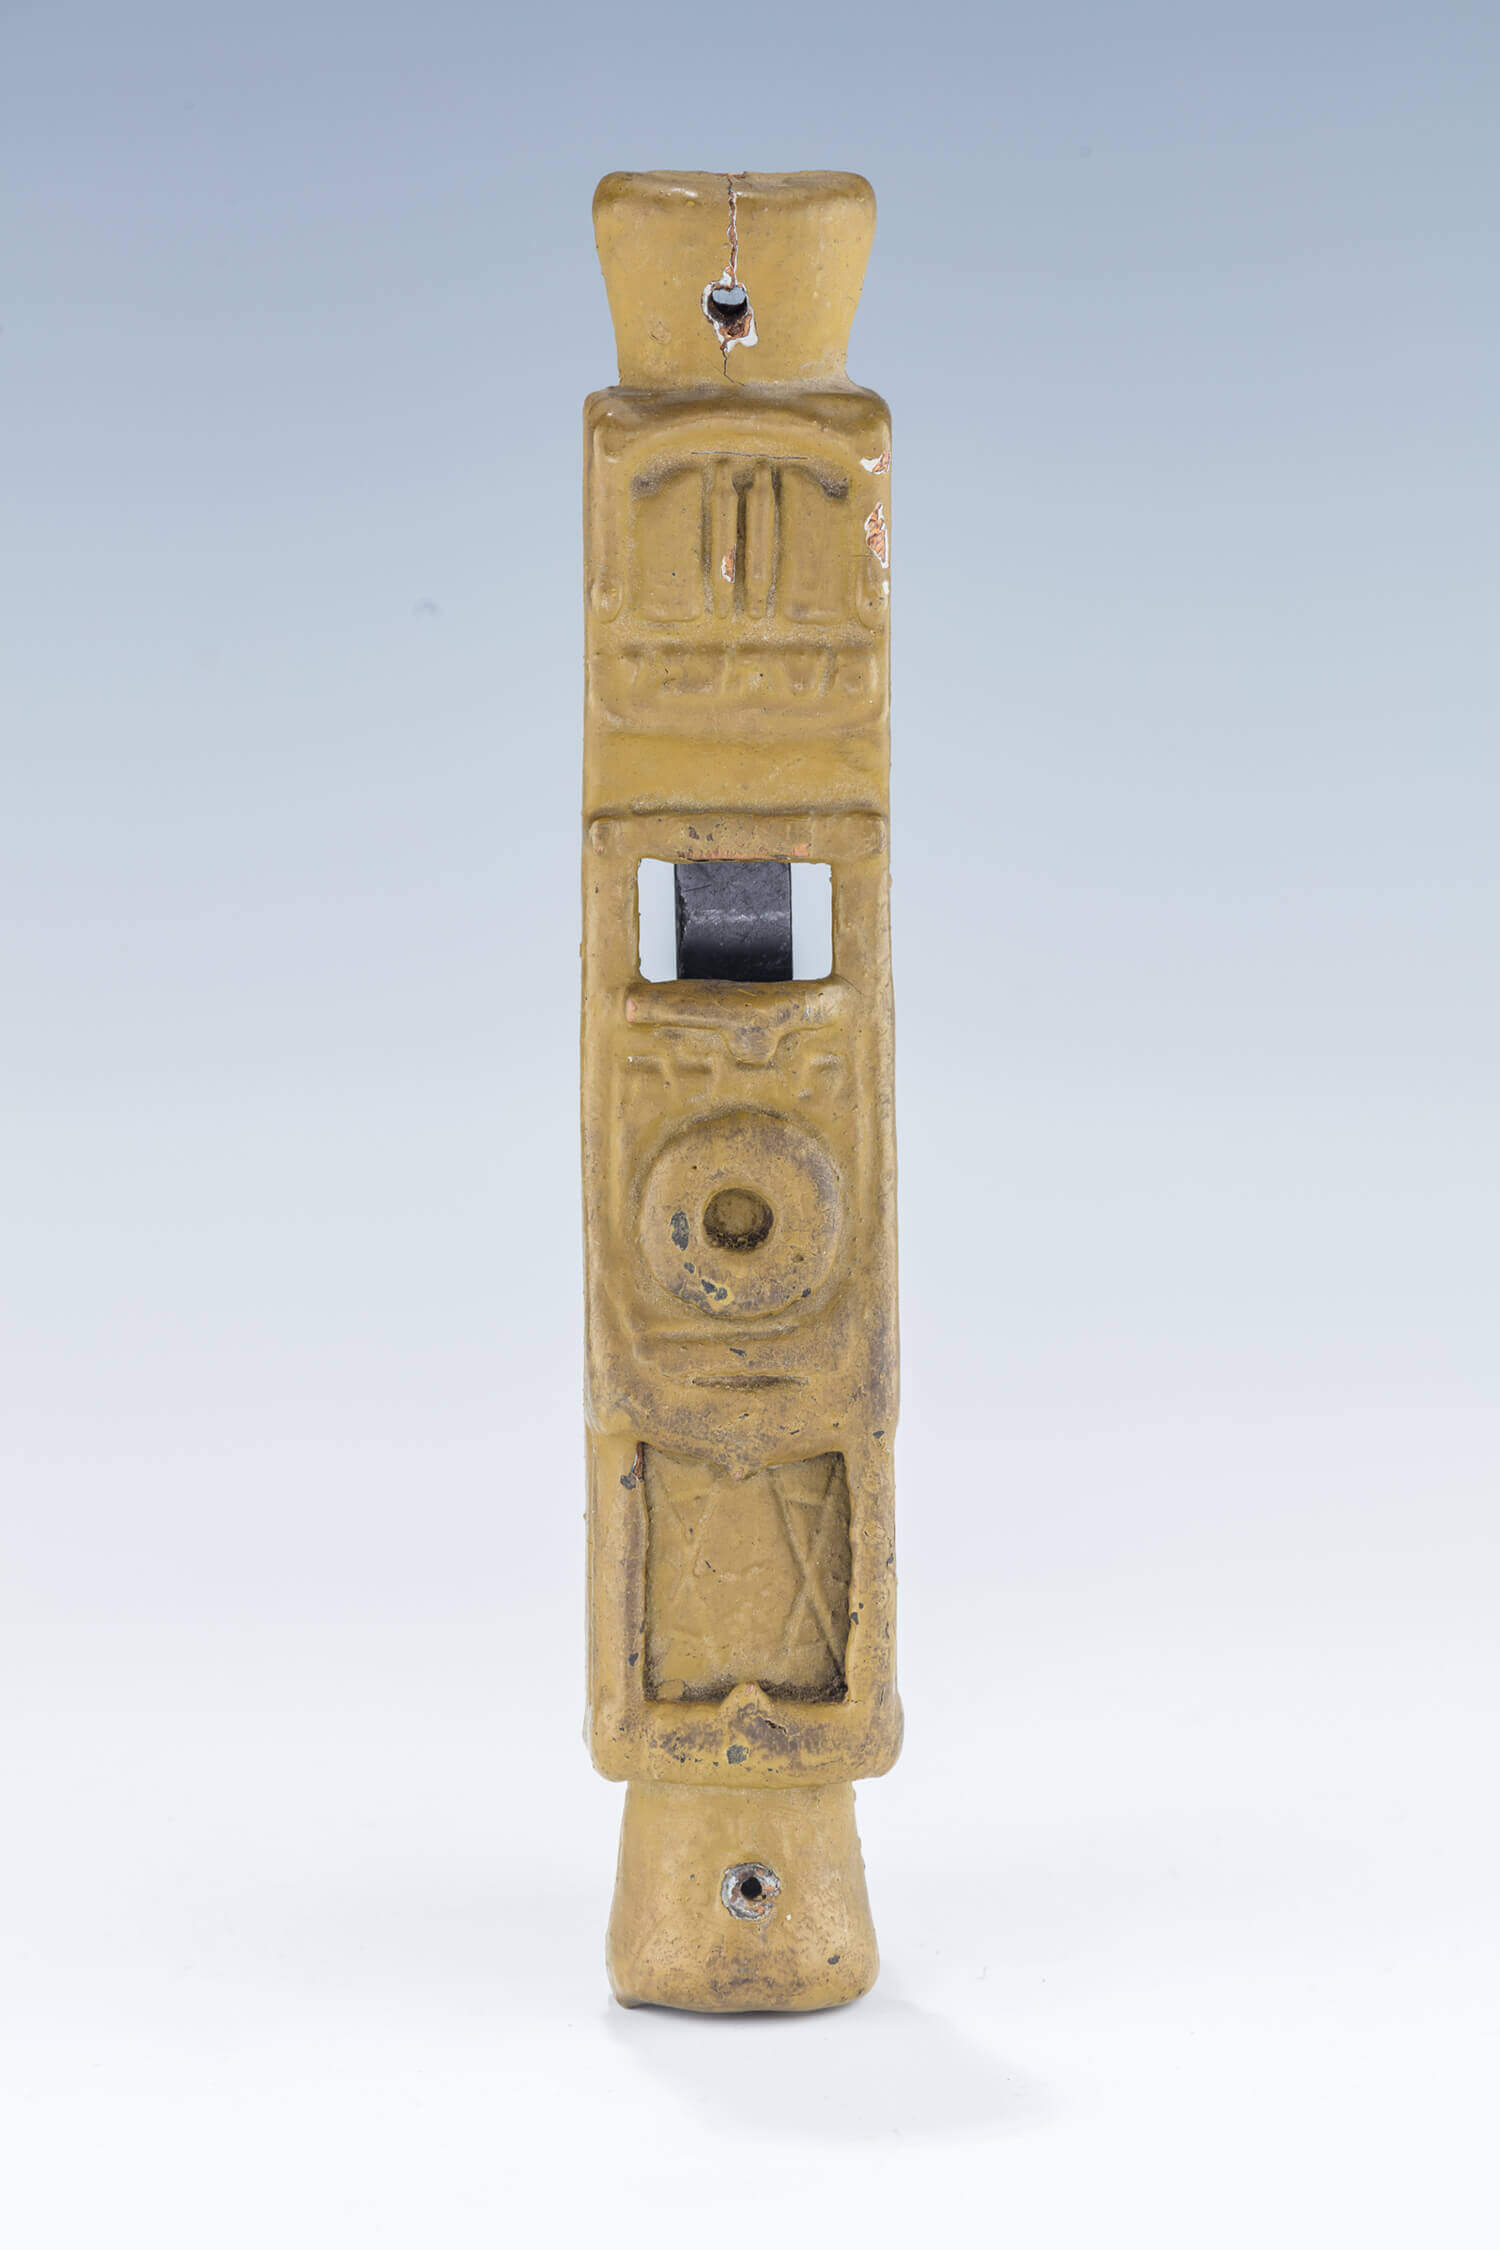 065. A RARE AND IMPORTANT WOODEN MEZUZAH